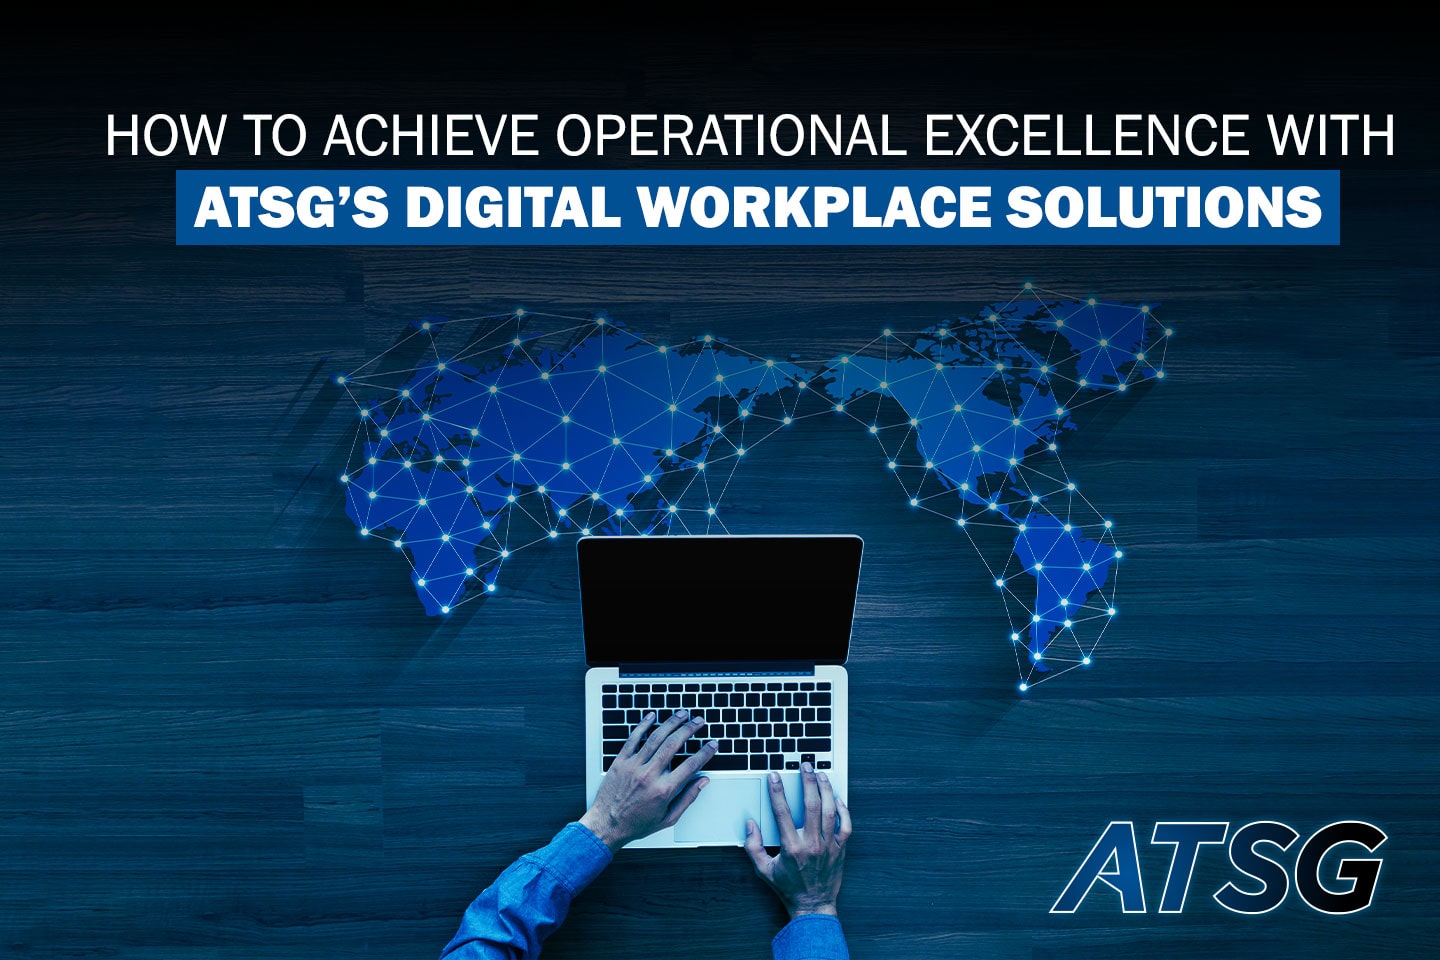 How-to-Achieve-Operational-Excellence-with-ATSG’s-Digital-Workplace-Solutions-Featured